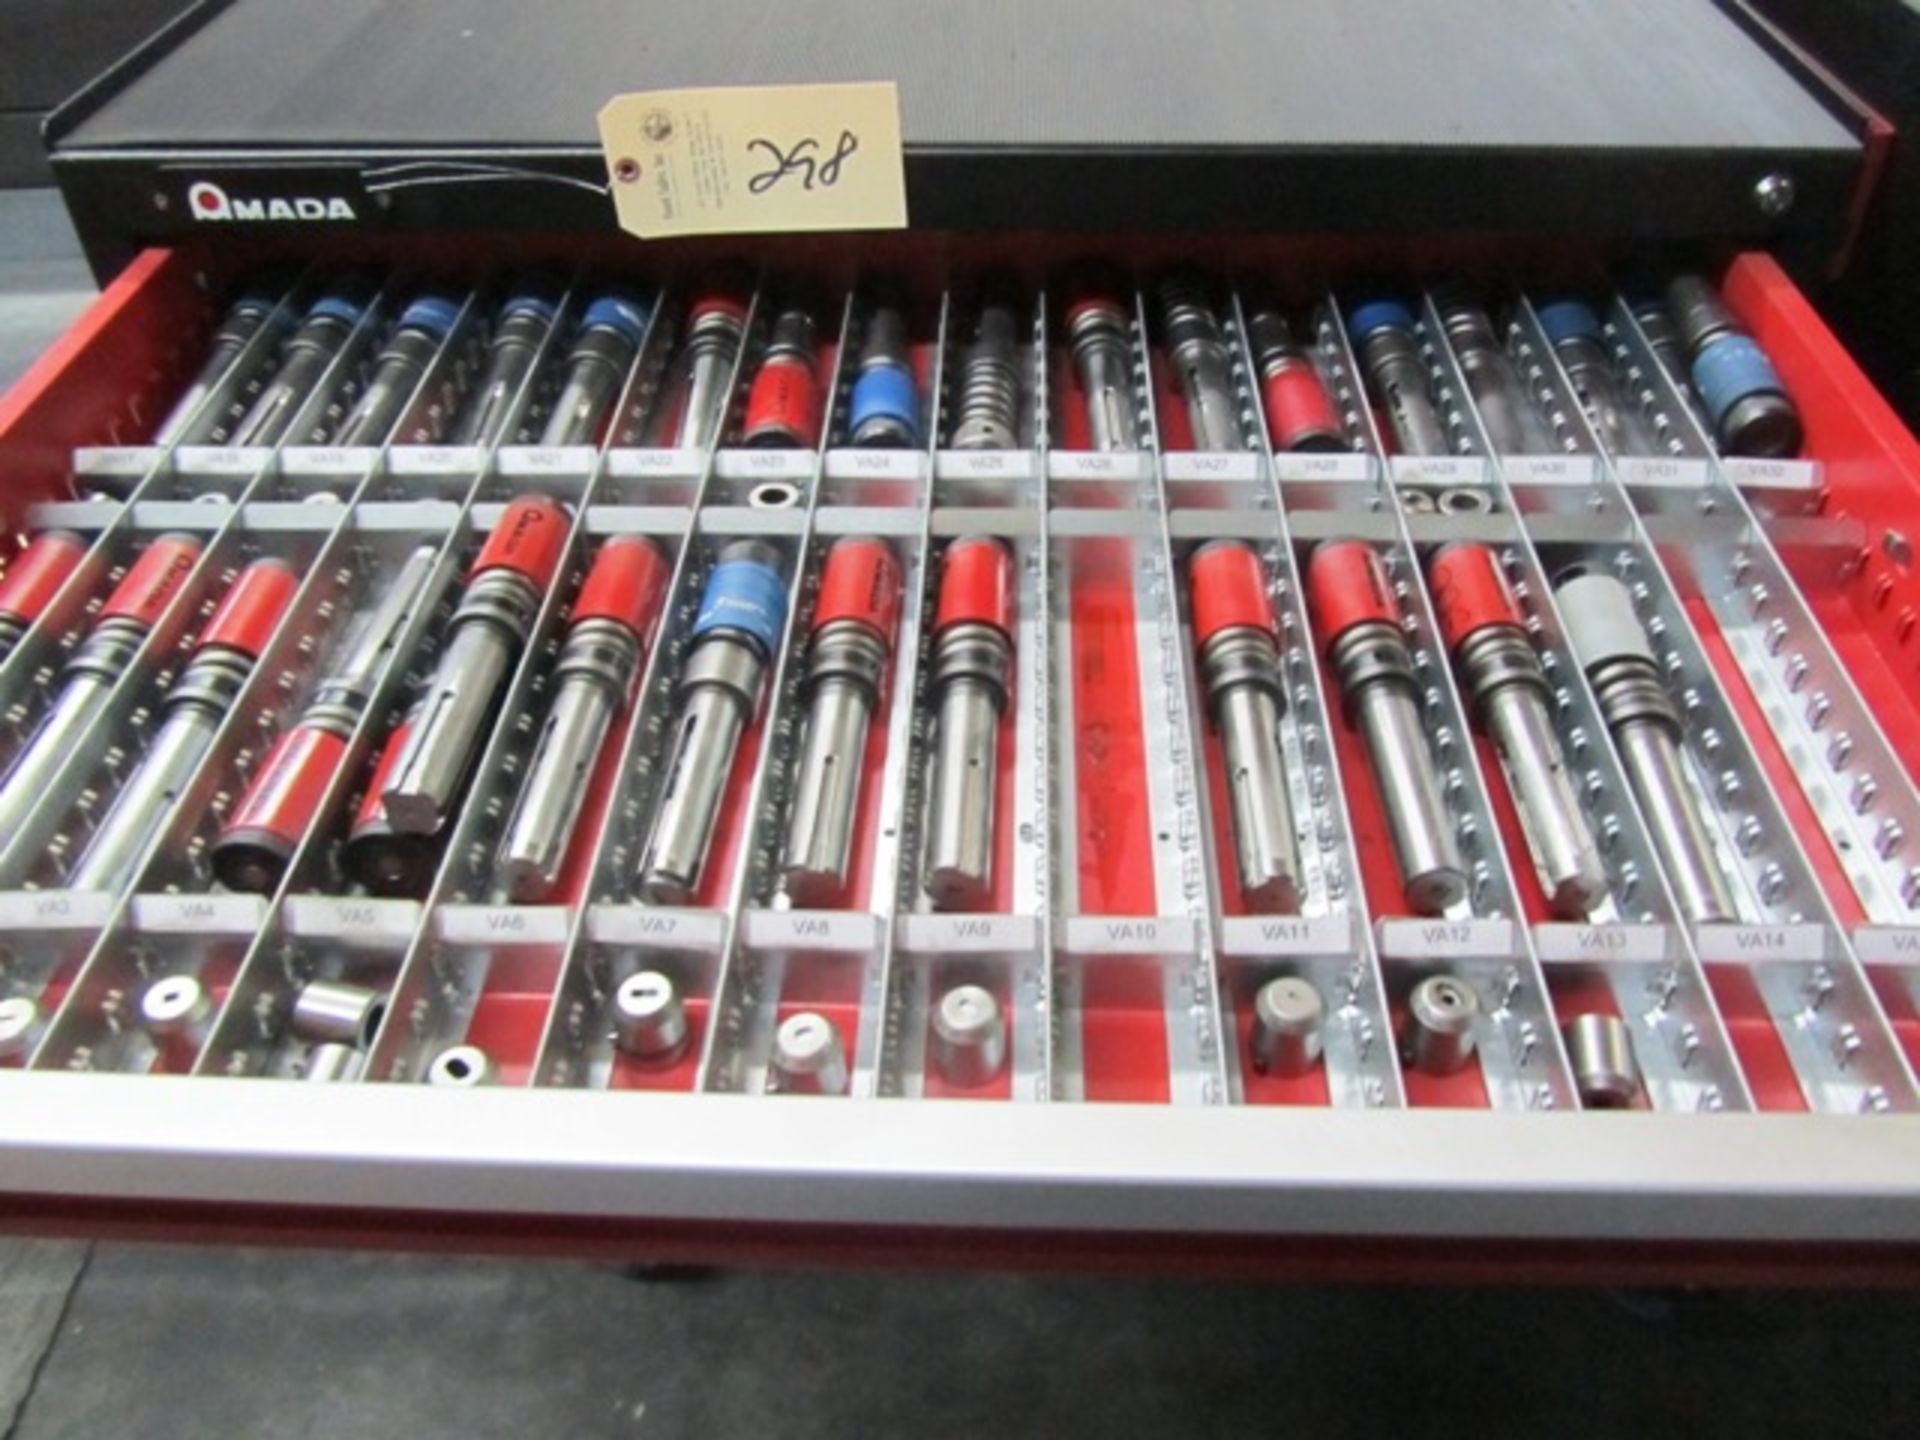 Amada 8 Drawer Portable Tool Cabinet with Turret Punches & Dies - Image 2 of 8